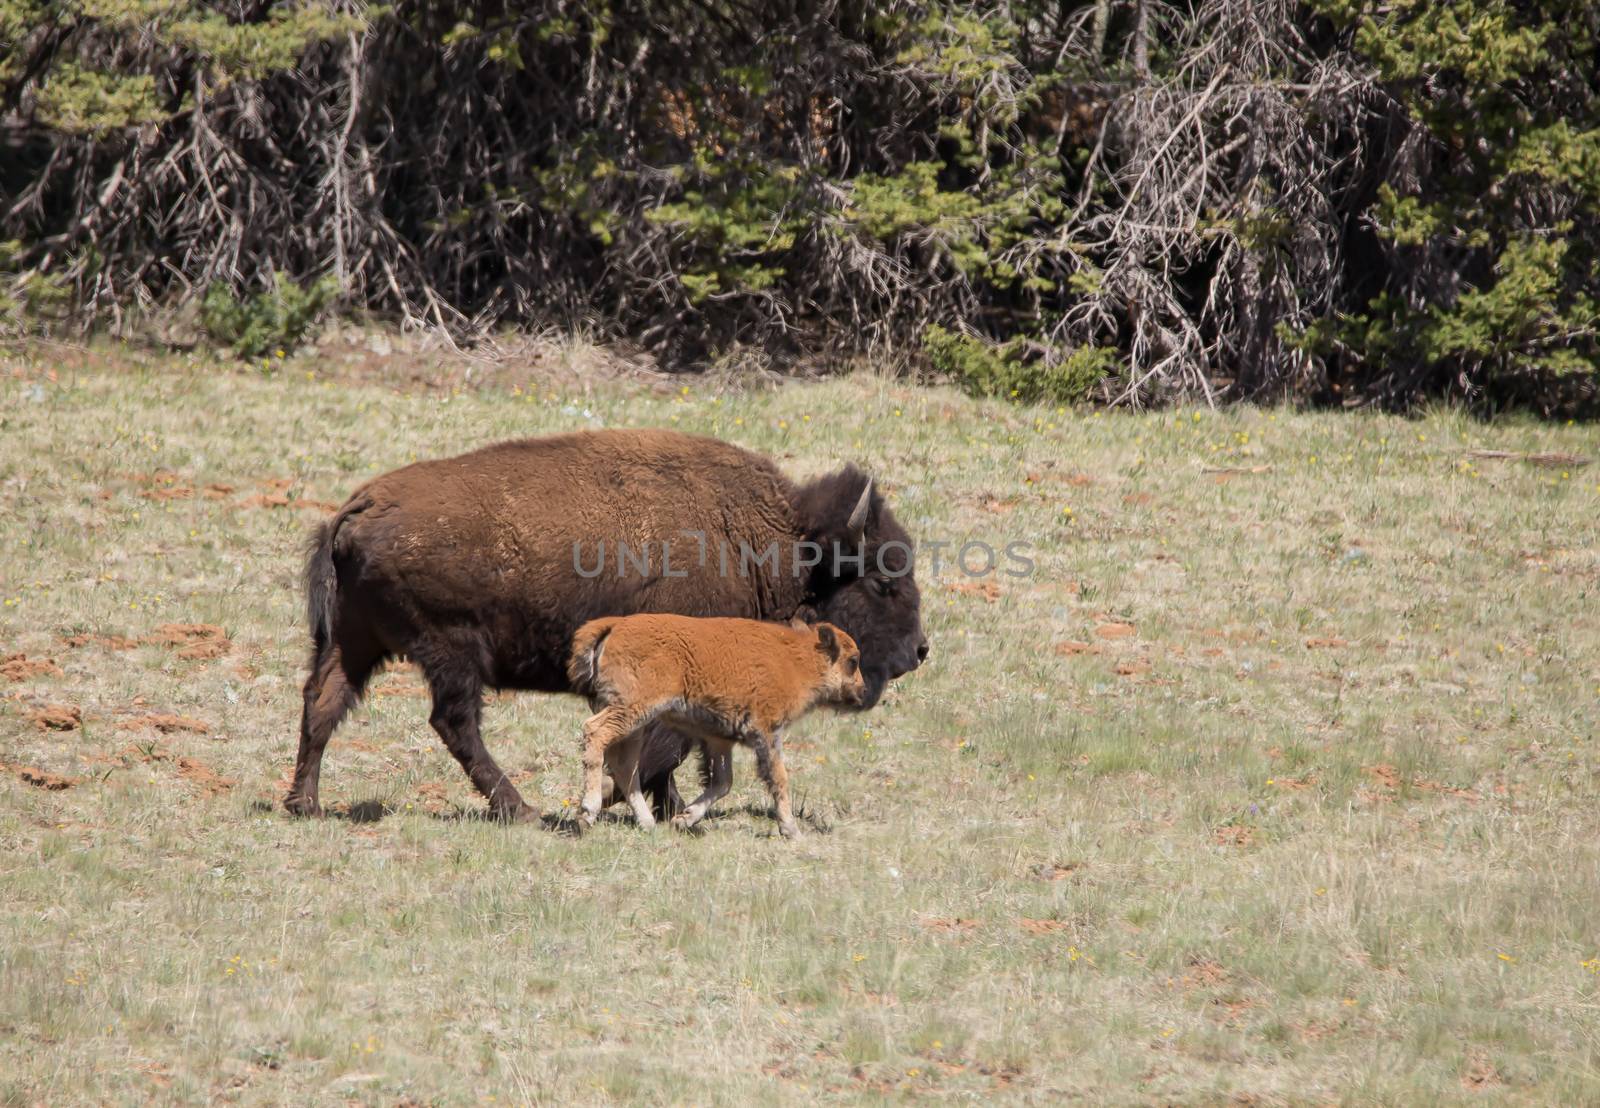 Bison and calf in North Rim of the Grand Canyon National Park, Arizona.